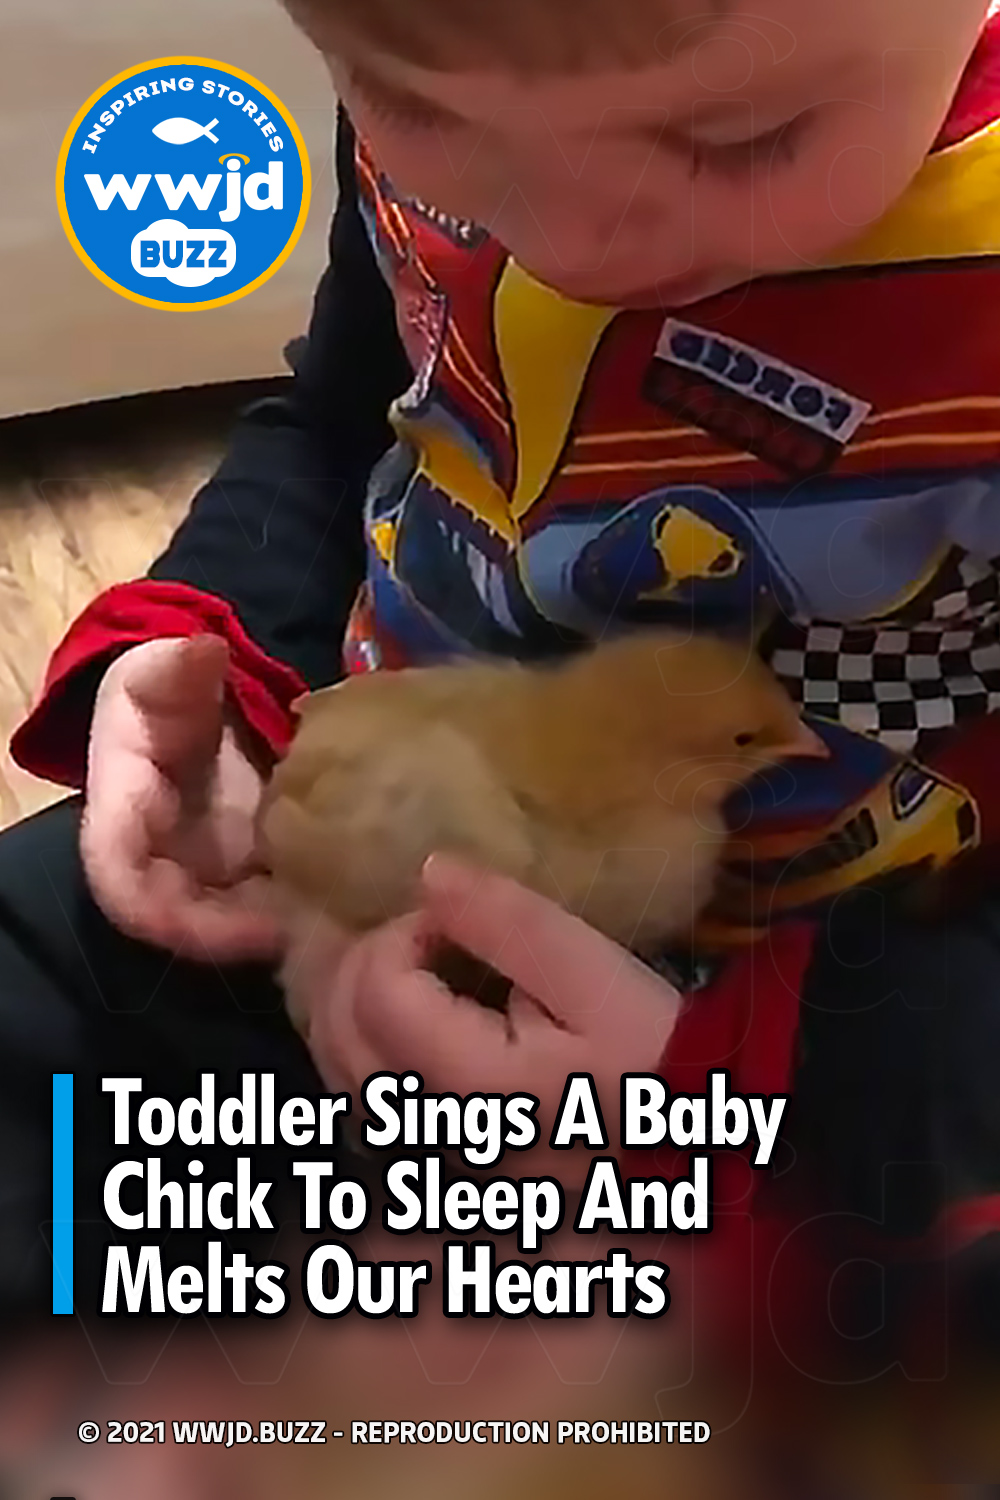 Toddler Sings A Baby Chick To Sleep And Melts Our Hearts